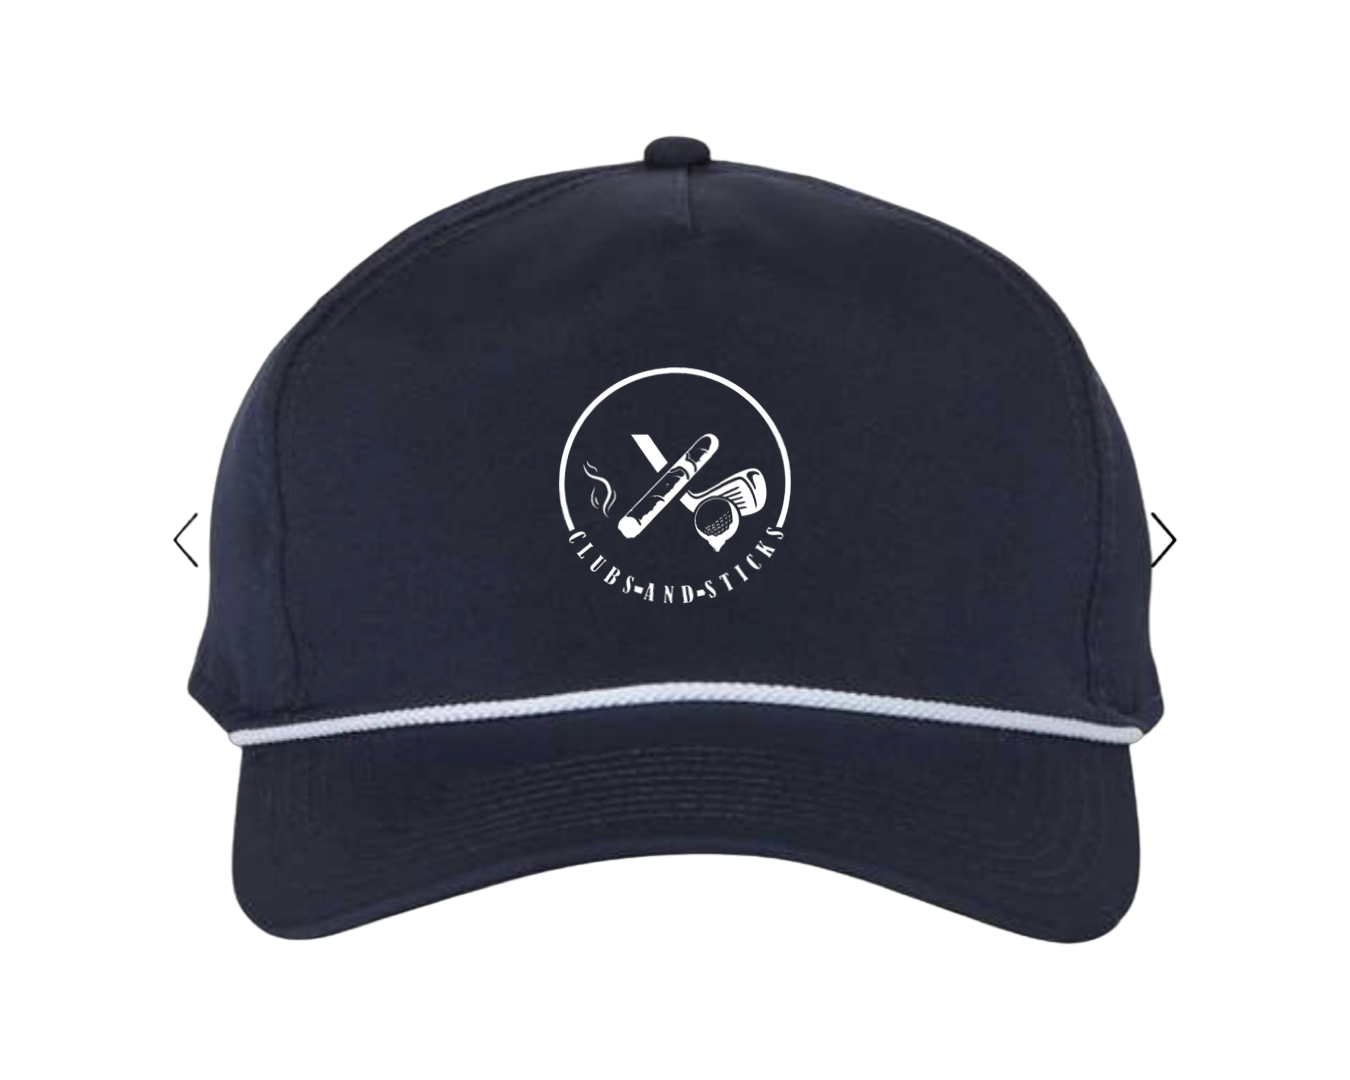 Clubs and Sticks Polyester adjustable Hat